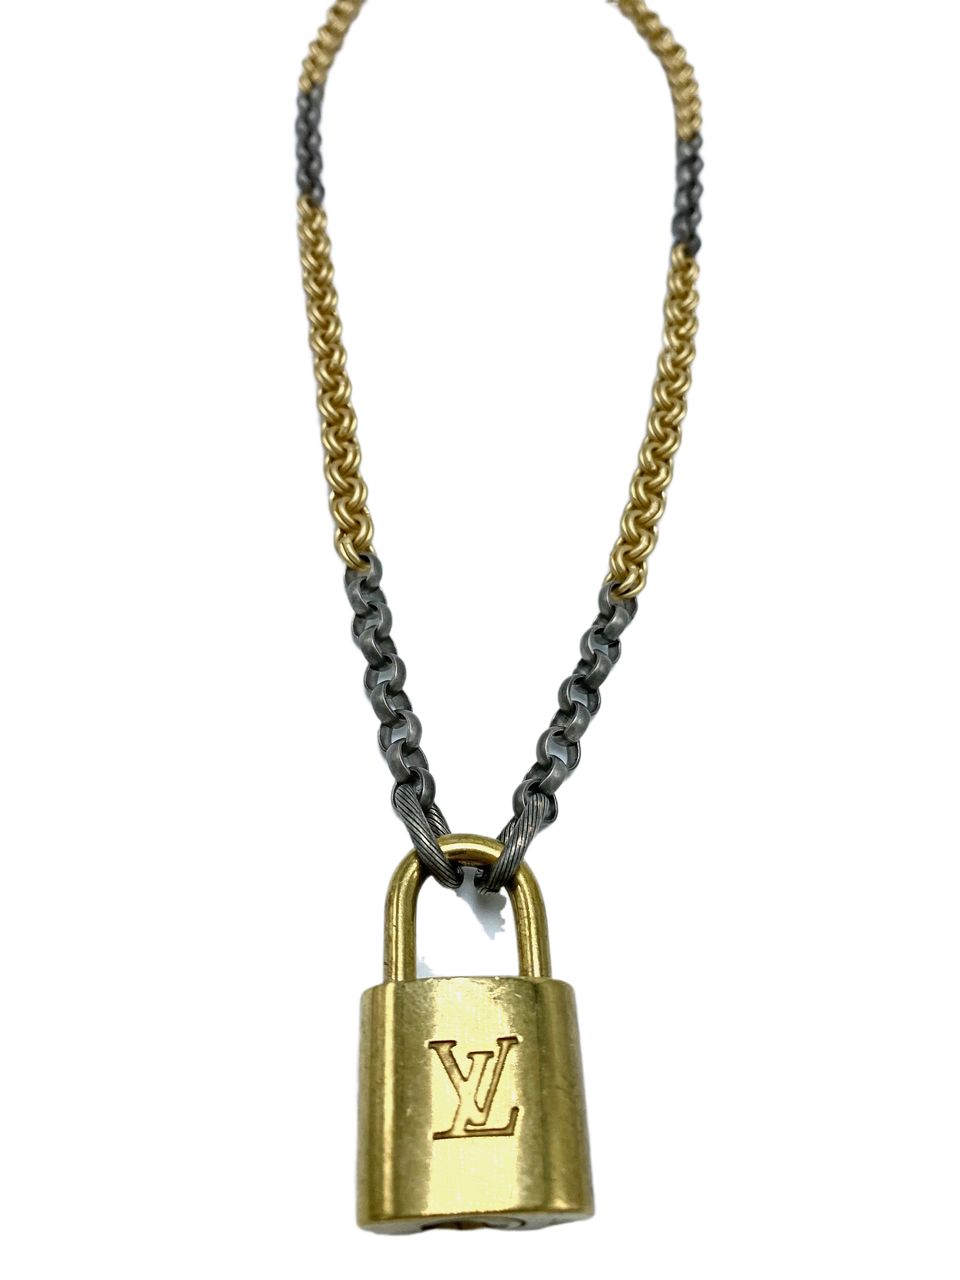 Silver and Necklace with Vintage LV Lock G. Spinelli